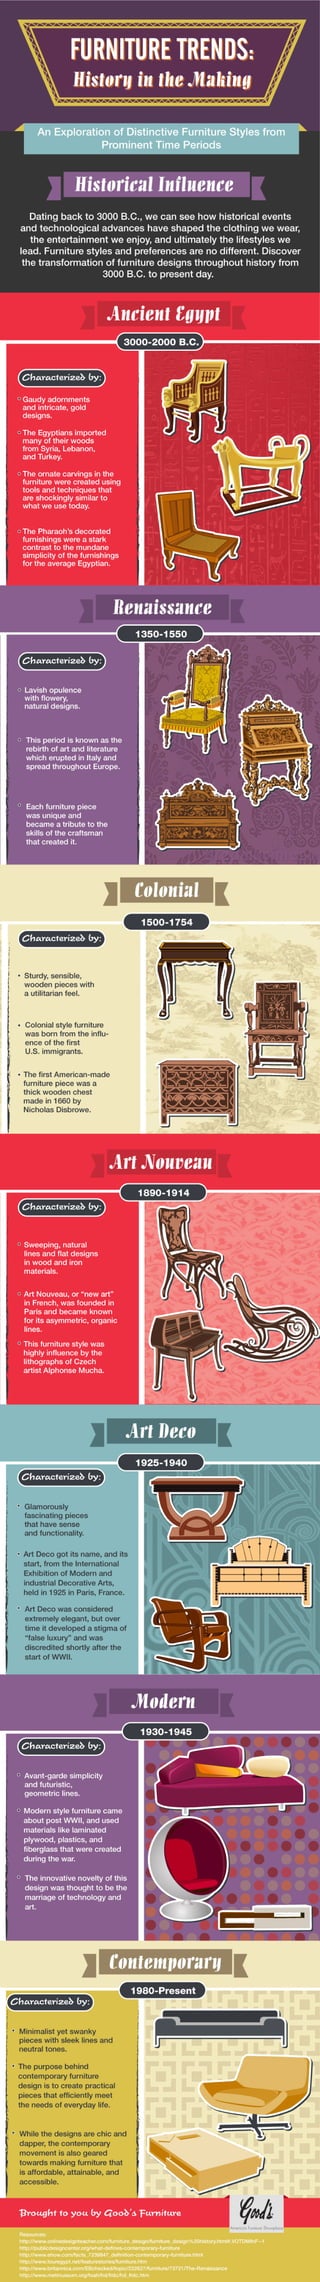 Furniture Trends: History in the Making